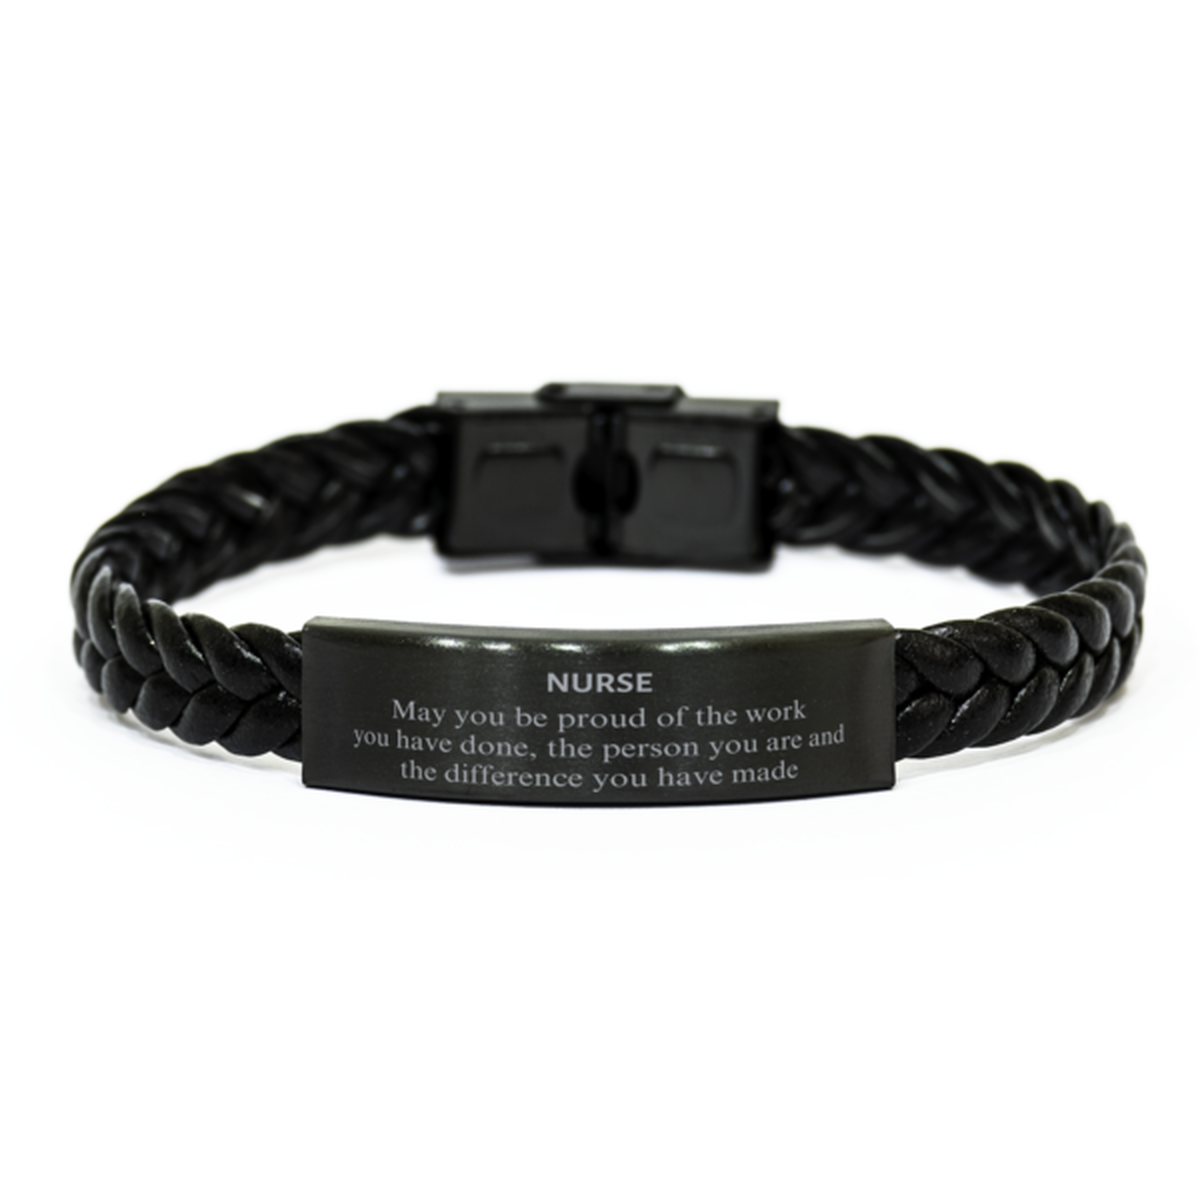 Nurse May you be proud of the work you have done, Retirement Nurse Braided Leather Bracelet for Colleague Appreciation Gifts Amazing for Nurse